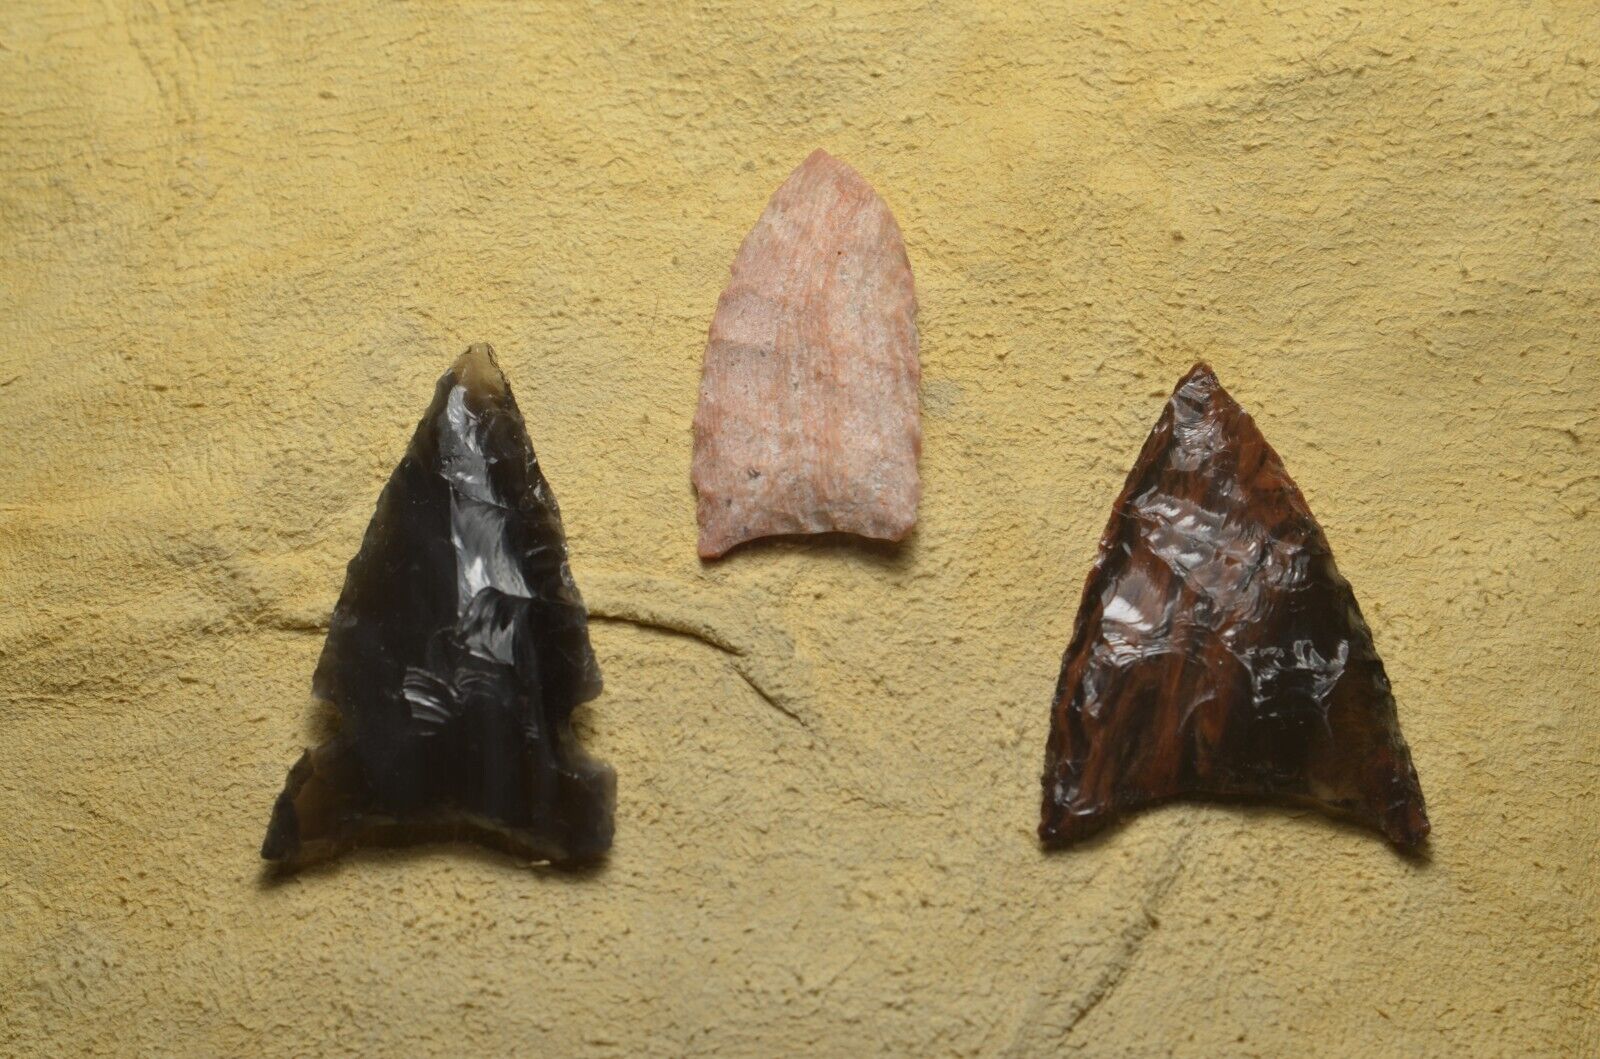 Authentic Modern Repro of North American Arrowhead Timeline